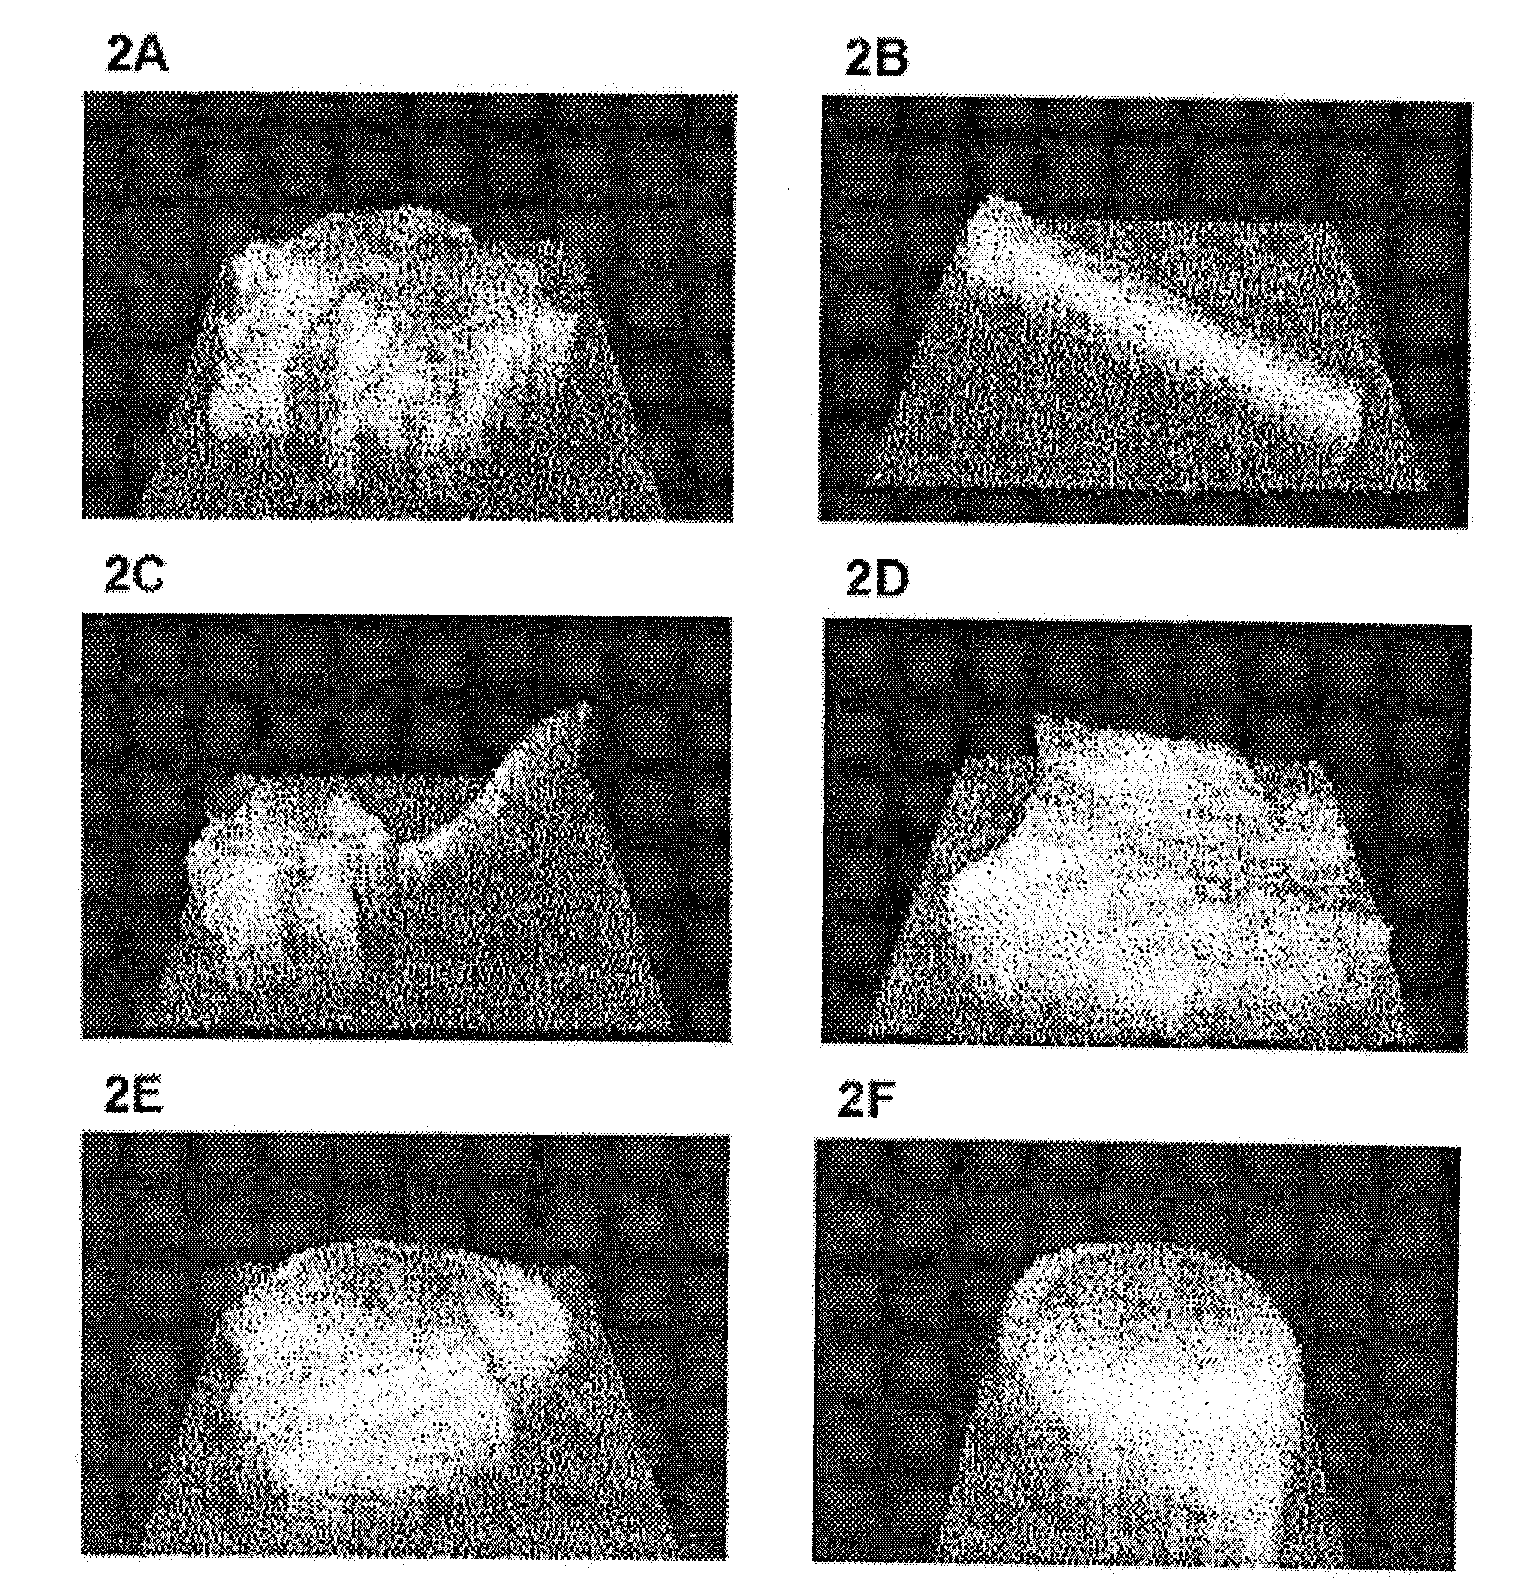 Method for classifying objects contained in seed lots and corresponding use for producing seed